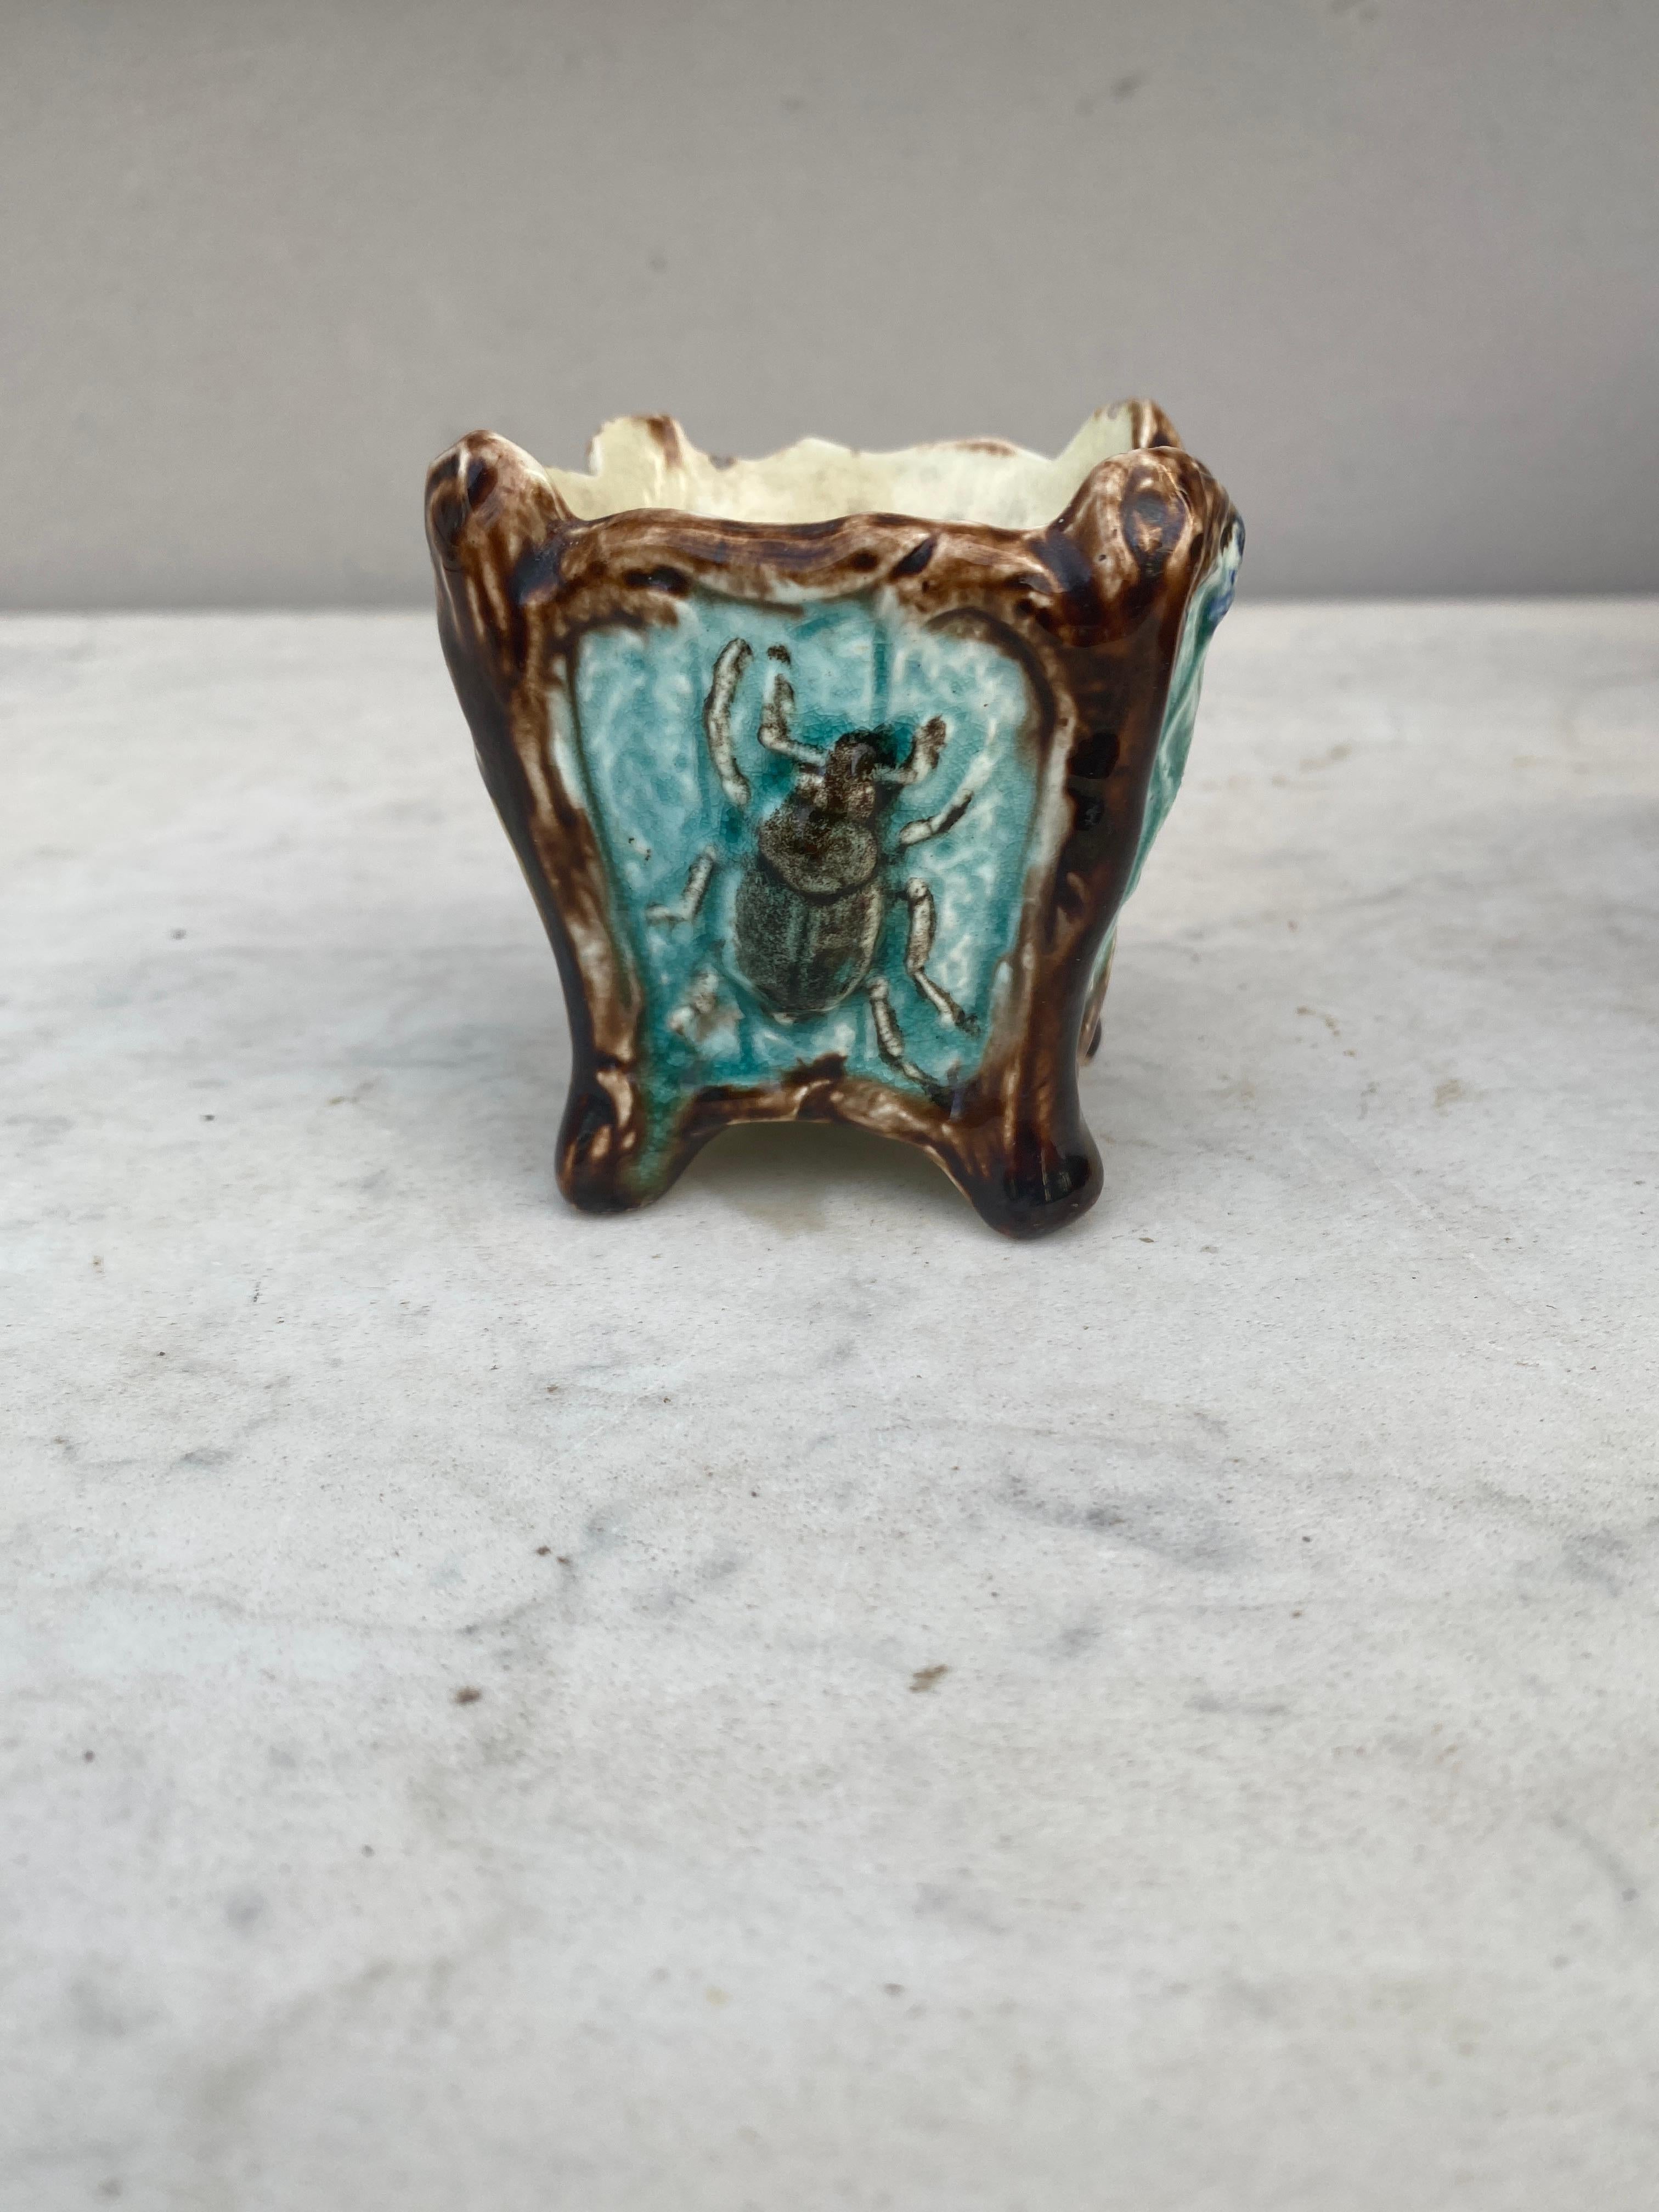 Small French Majolica cache pot attributed to Onnaing, circa 1890.
Decorated with butterfly,insect and leaves.
Measure : H / 2.7